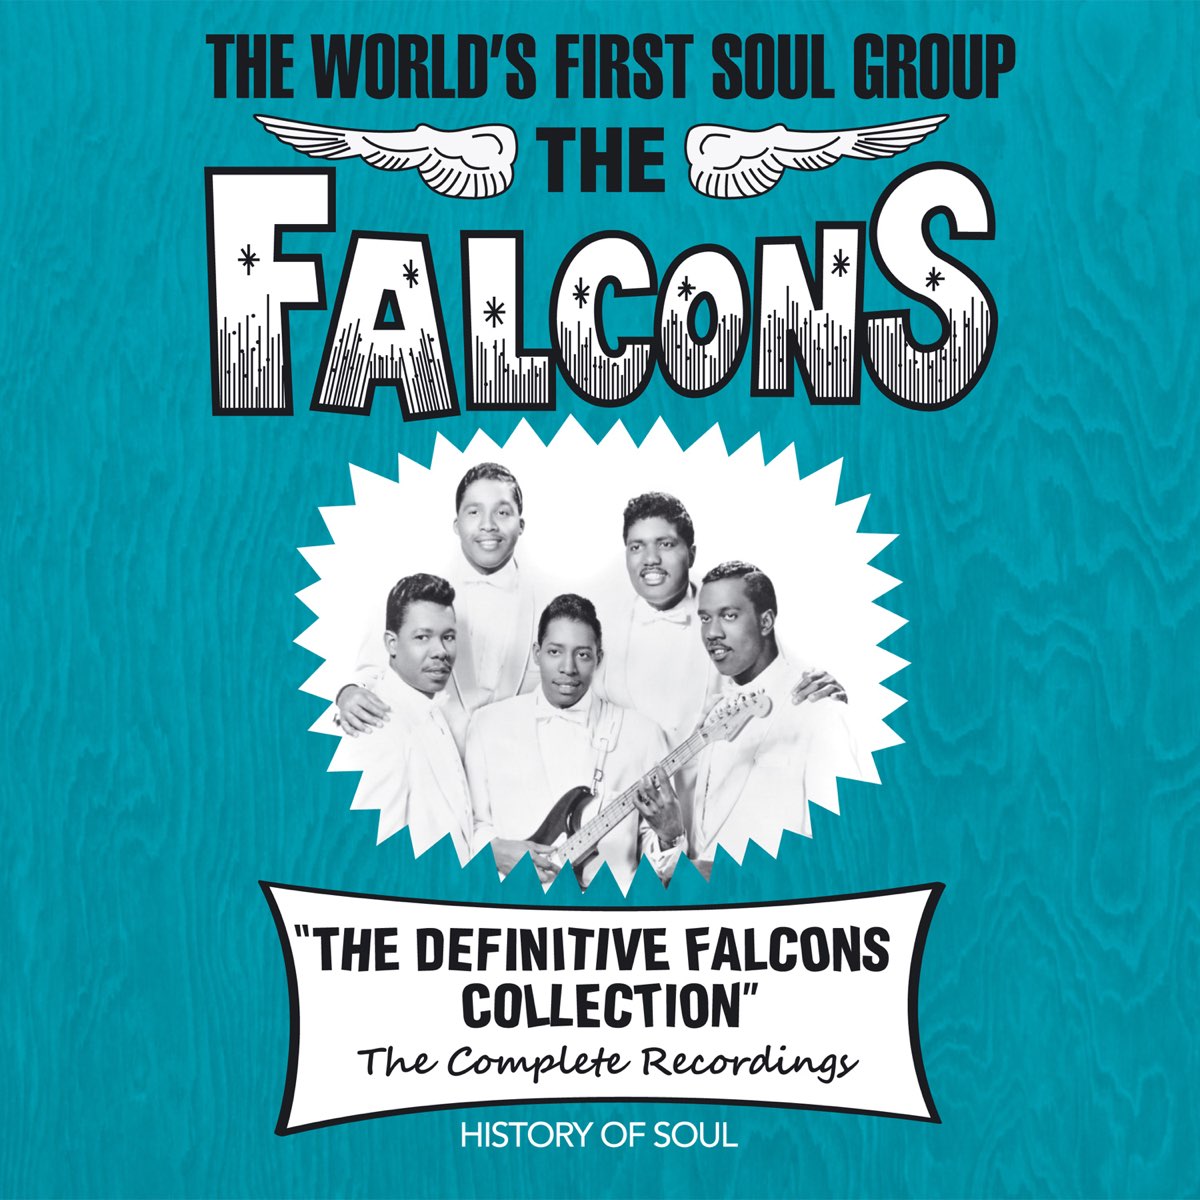 Band of the Falcon. Recording an album. The Falcons Band 1961. You're so Fine (the Falcons Song). Soul история